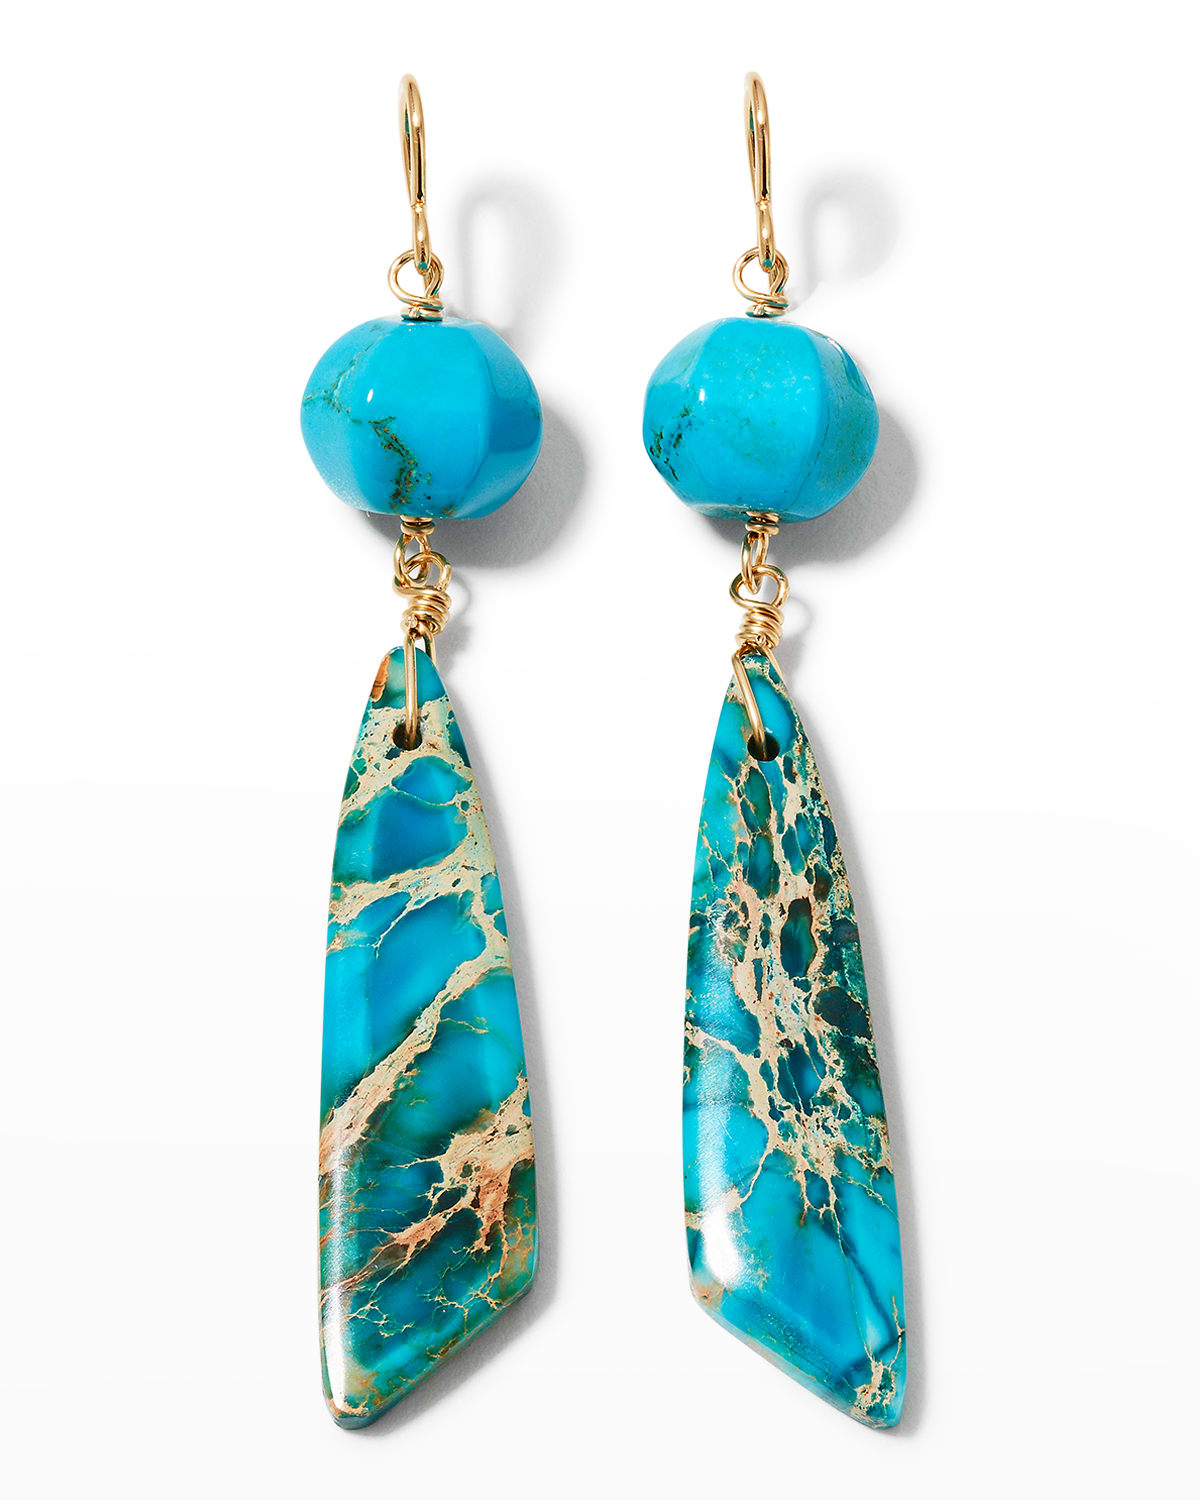 Devon Leigh Turquoise and Variscite Earrings